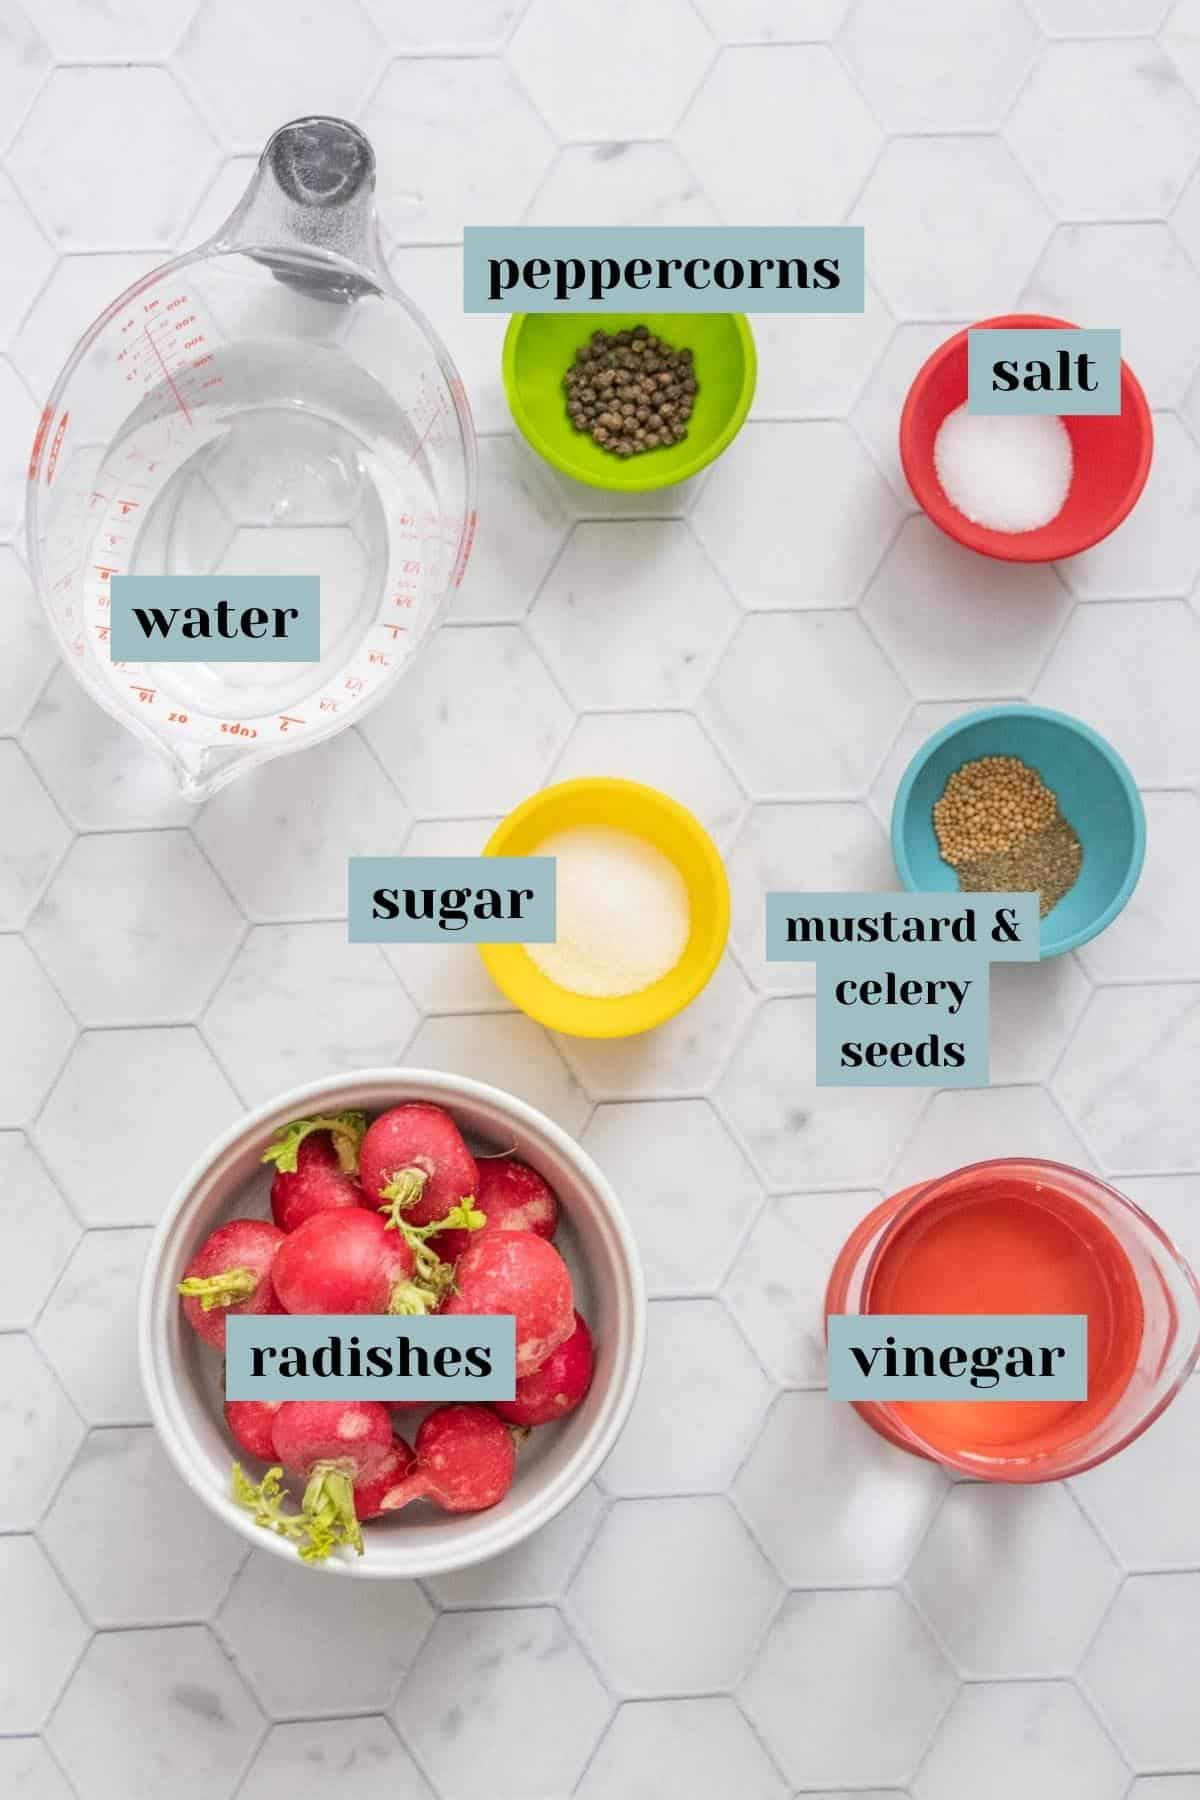 Ingredients for pickled radishes on a tile surface with labels.